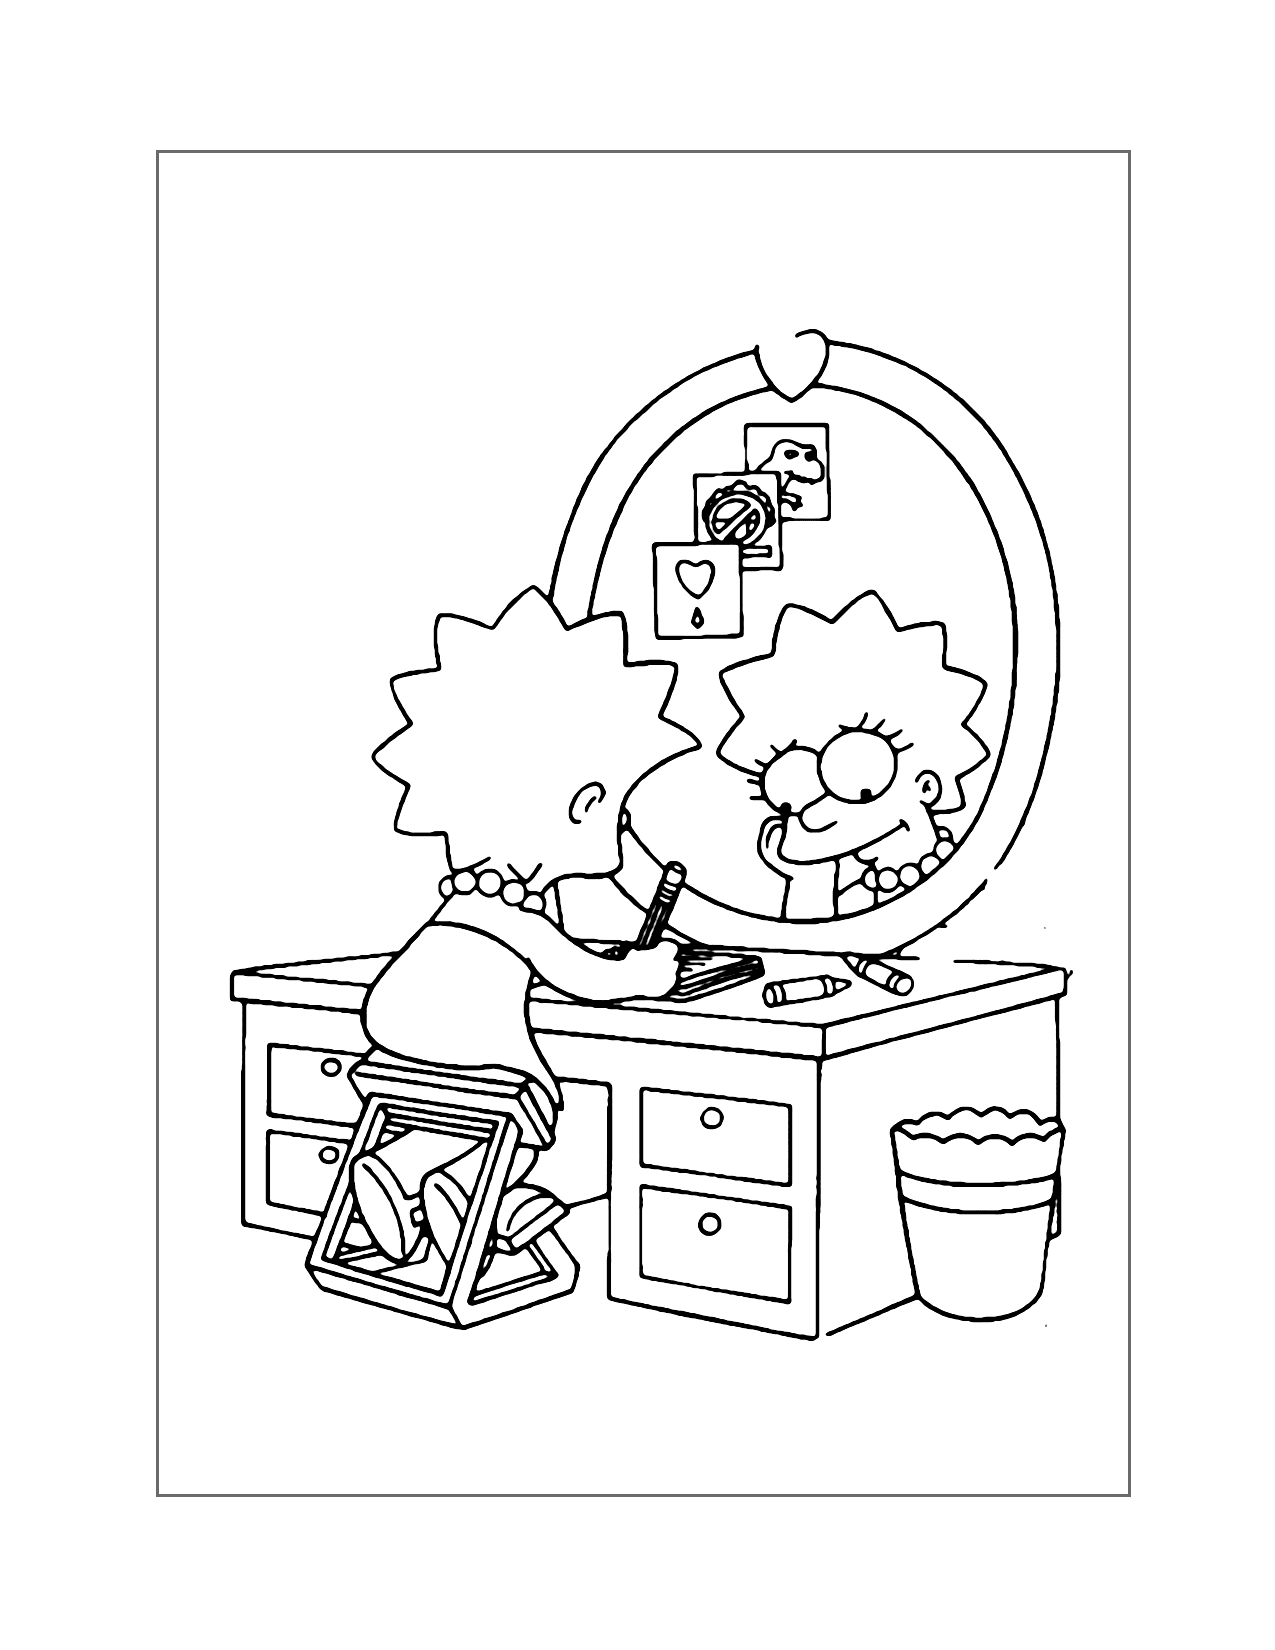 Lisa Simpson Writing A Letter Coloring Page